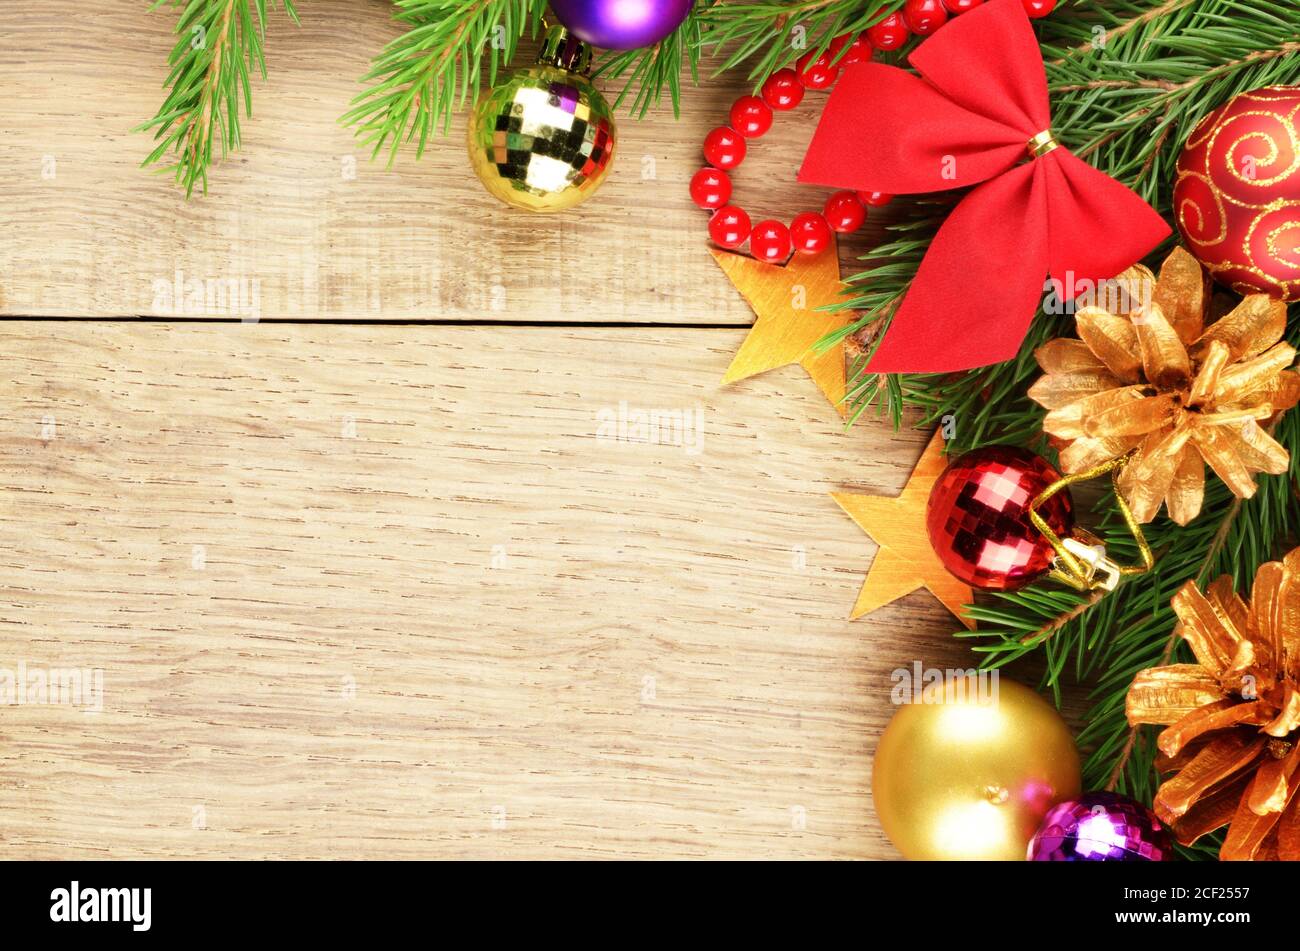 Christmas background with balls and decorations over wooden table Stock  Photo - Alamy